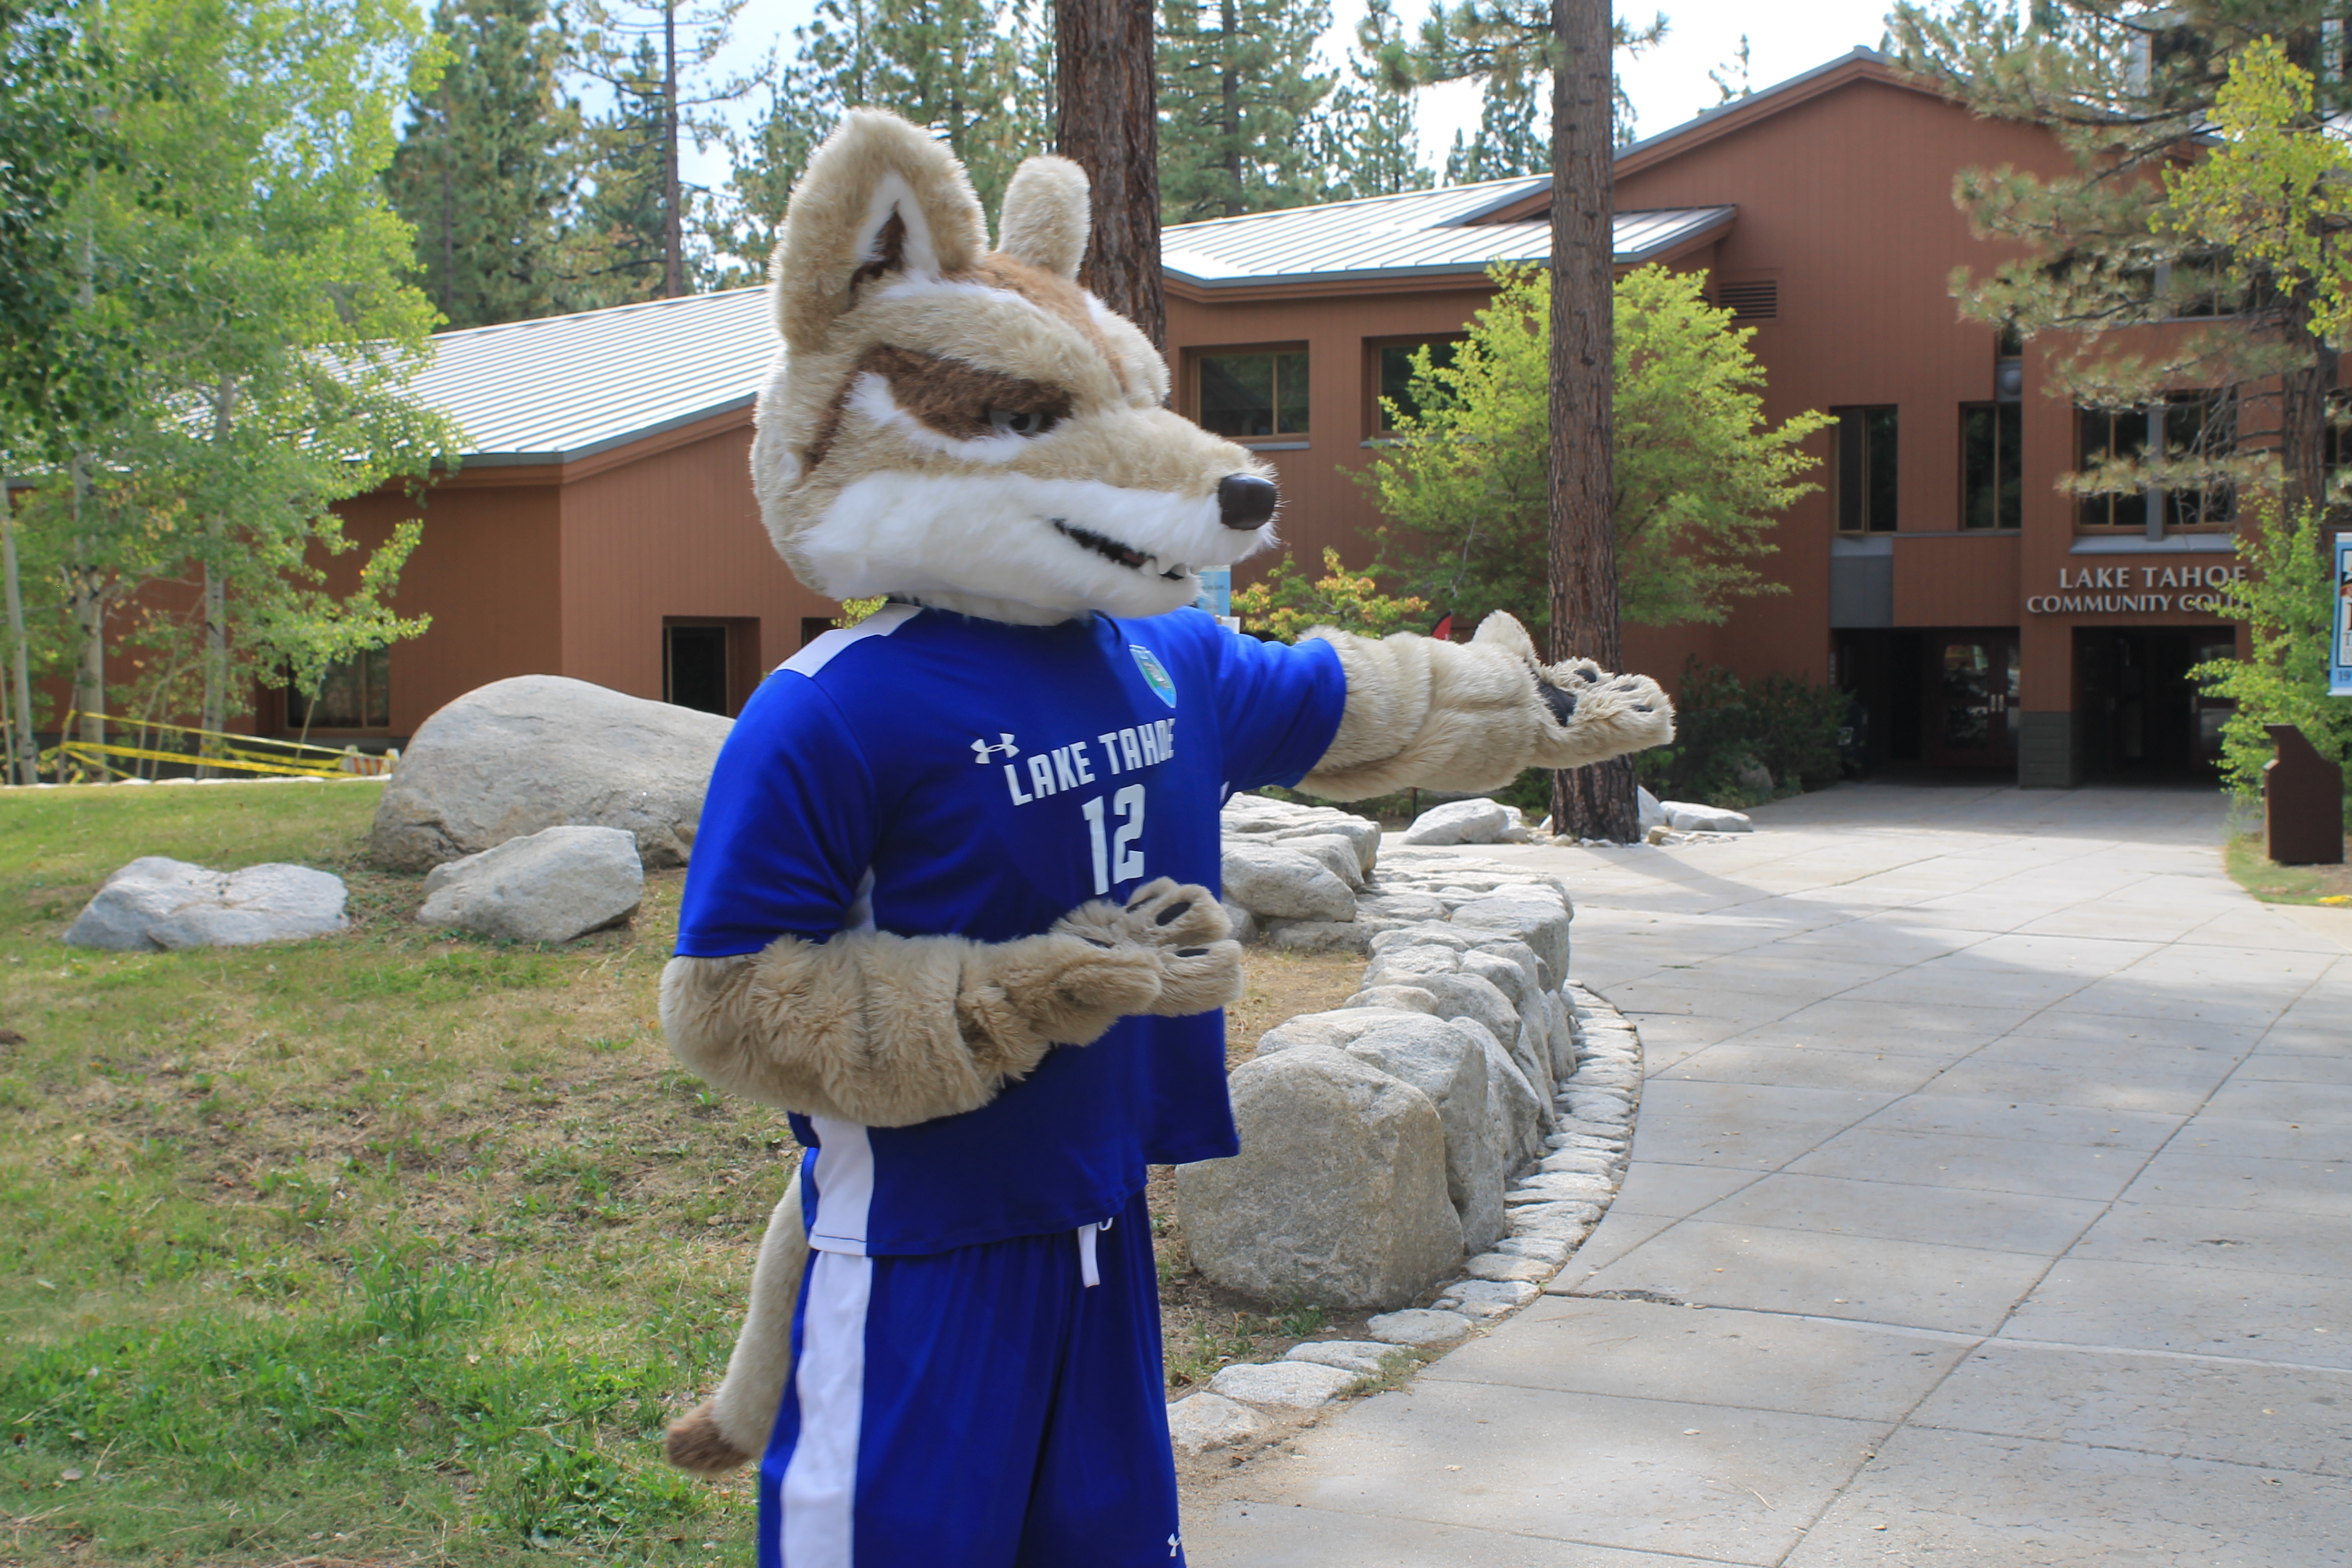 Coyote pointing at main building